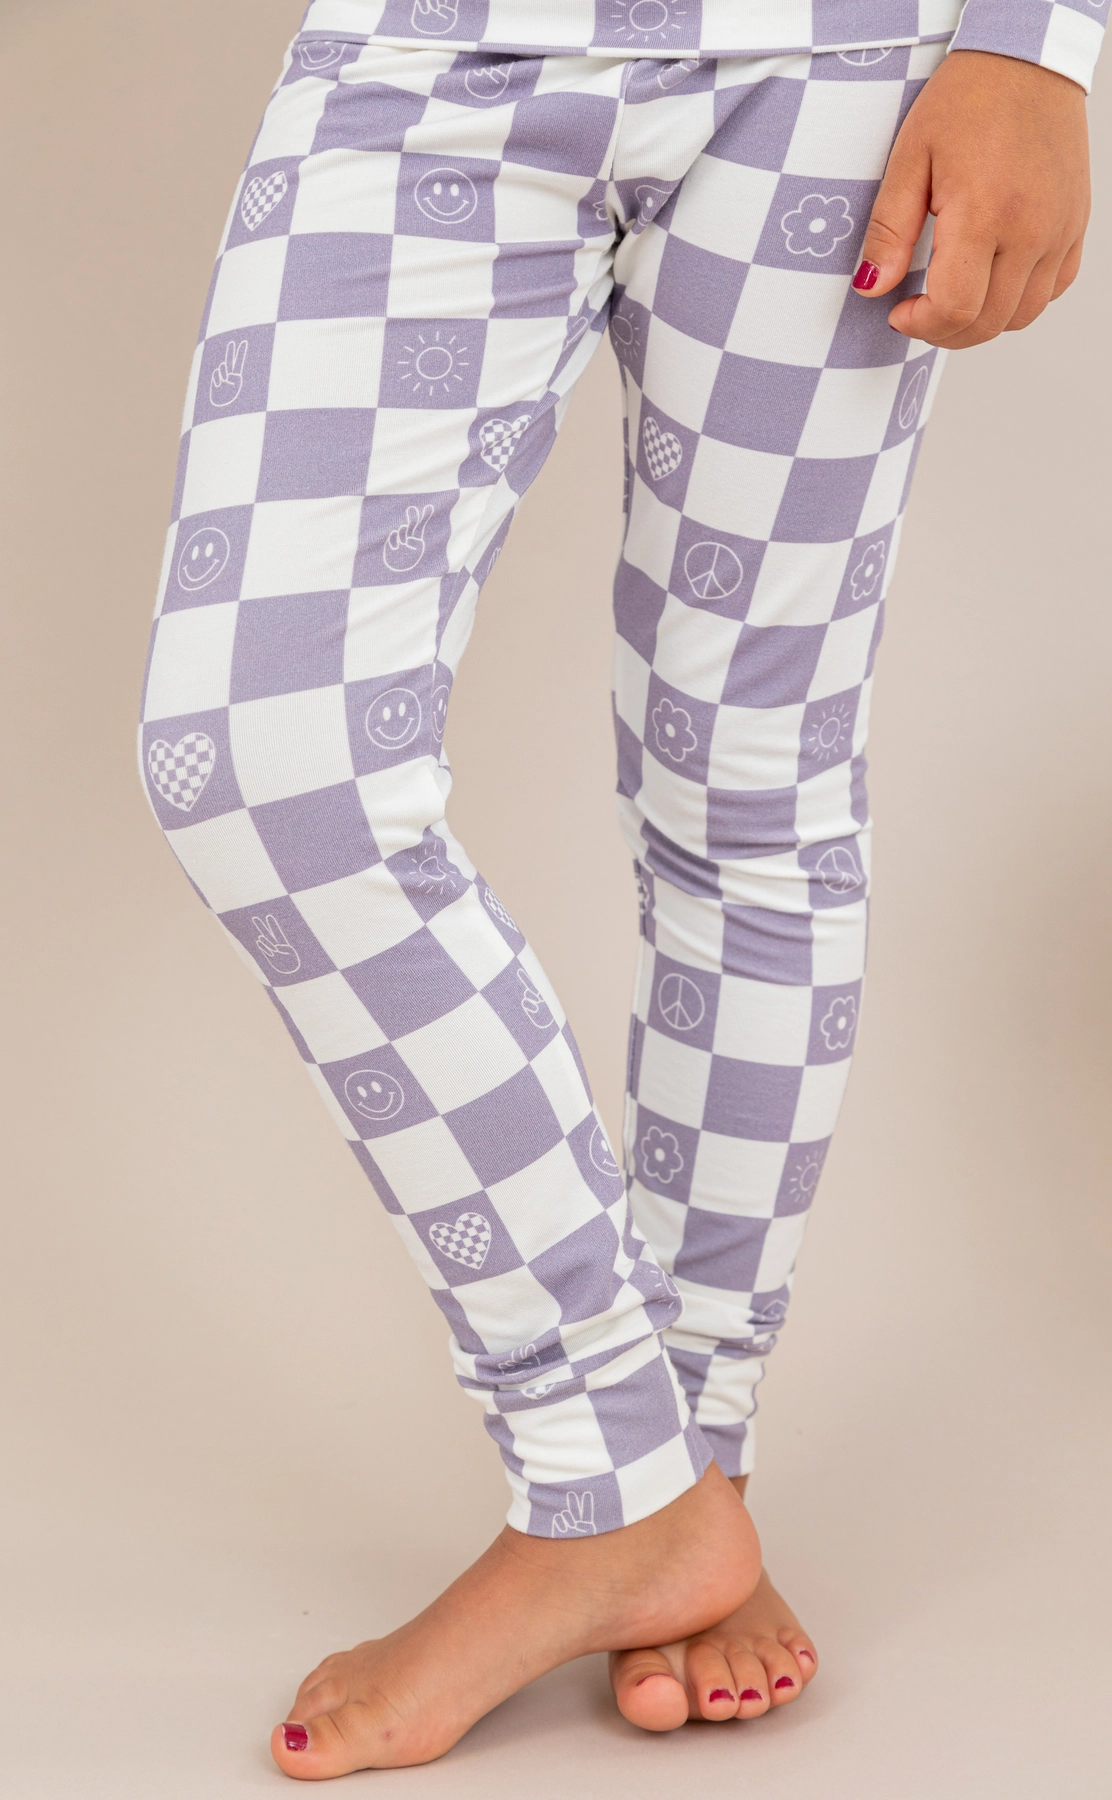 Lavender Check It Out Bamboo Pajama Set